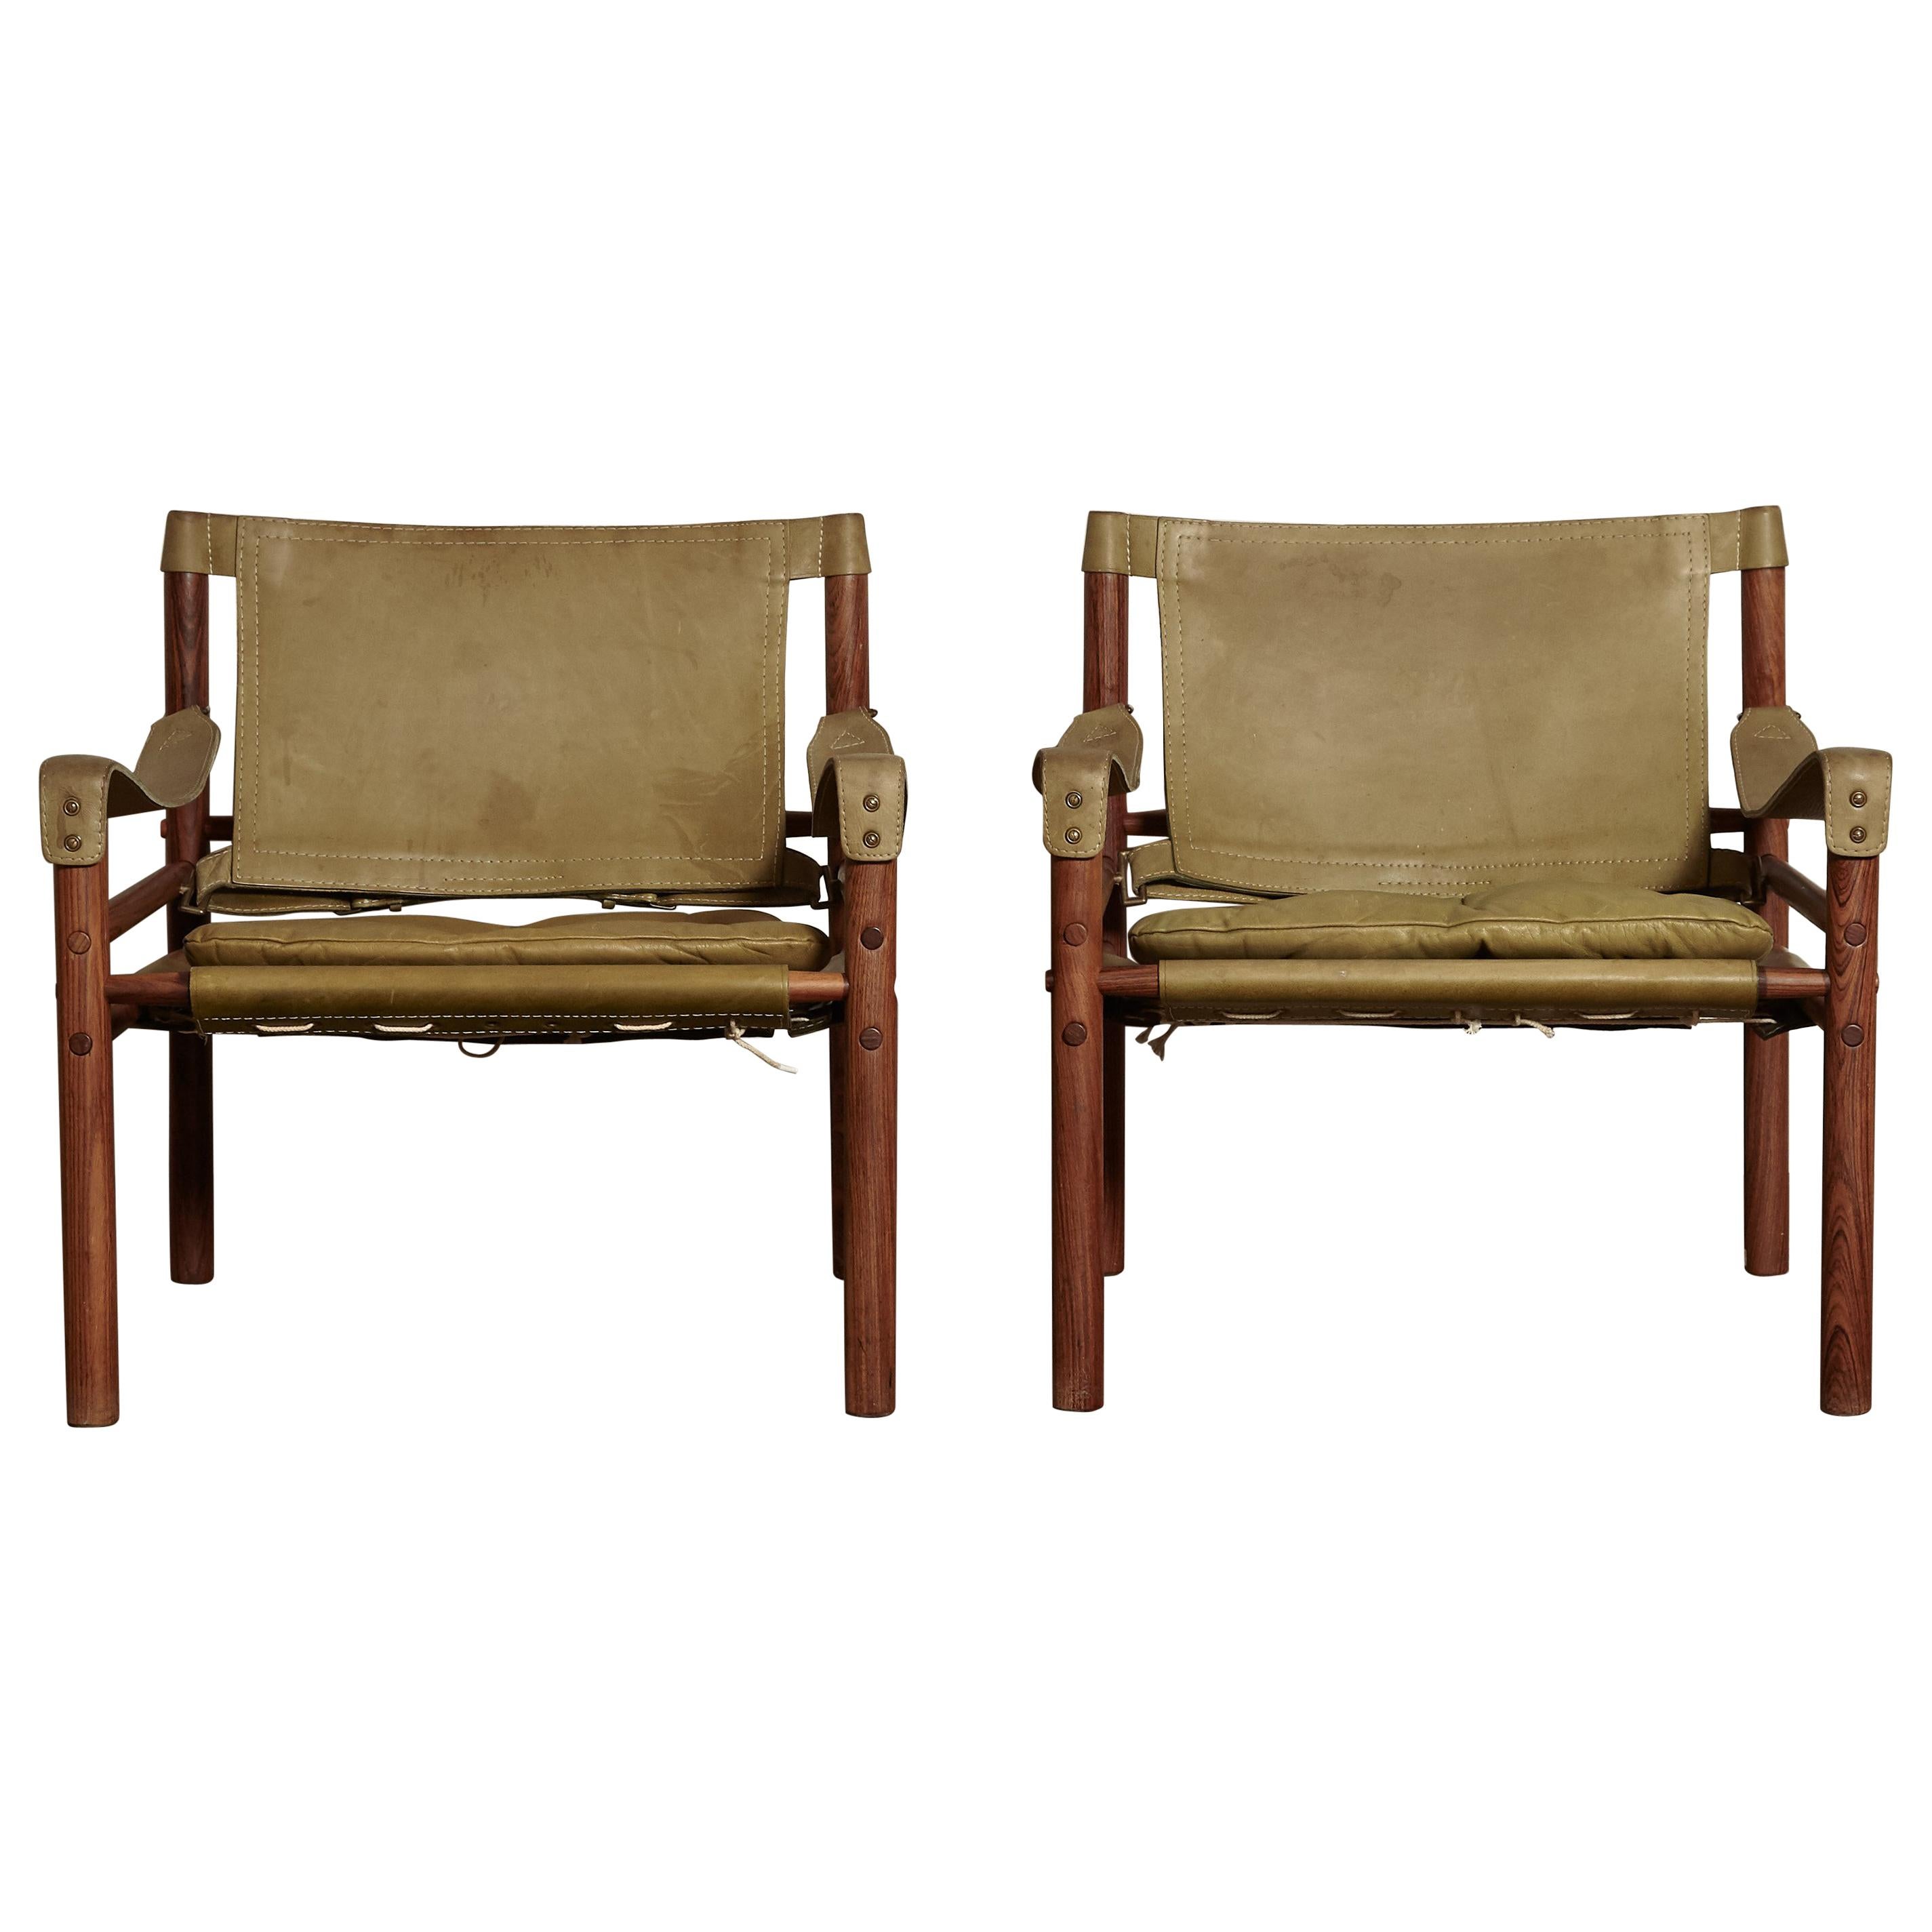 Pair of Arne Norell Safari Chairs, Green Leather, Sweden, 1970s